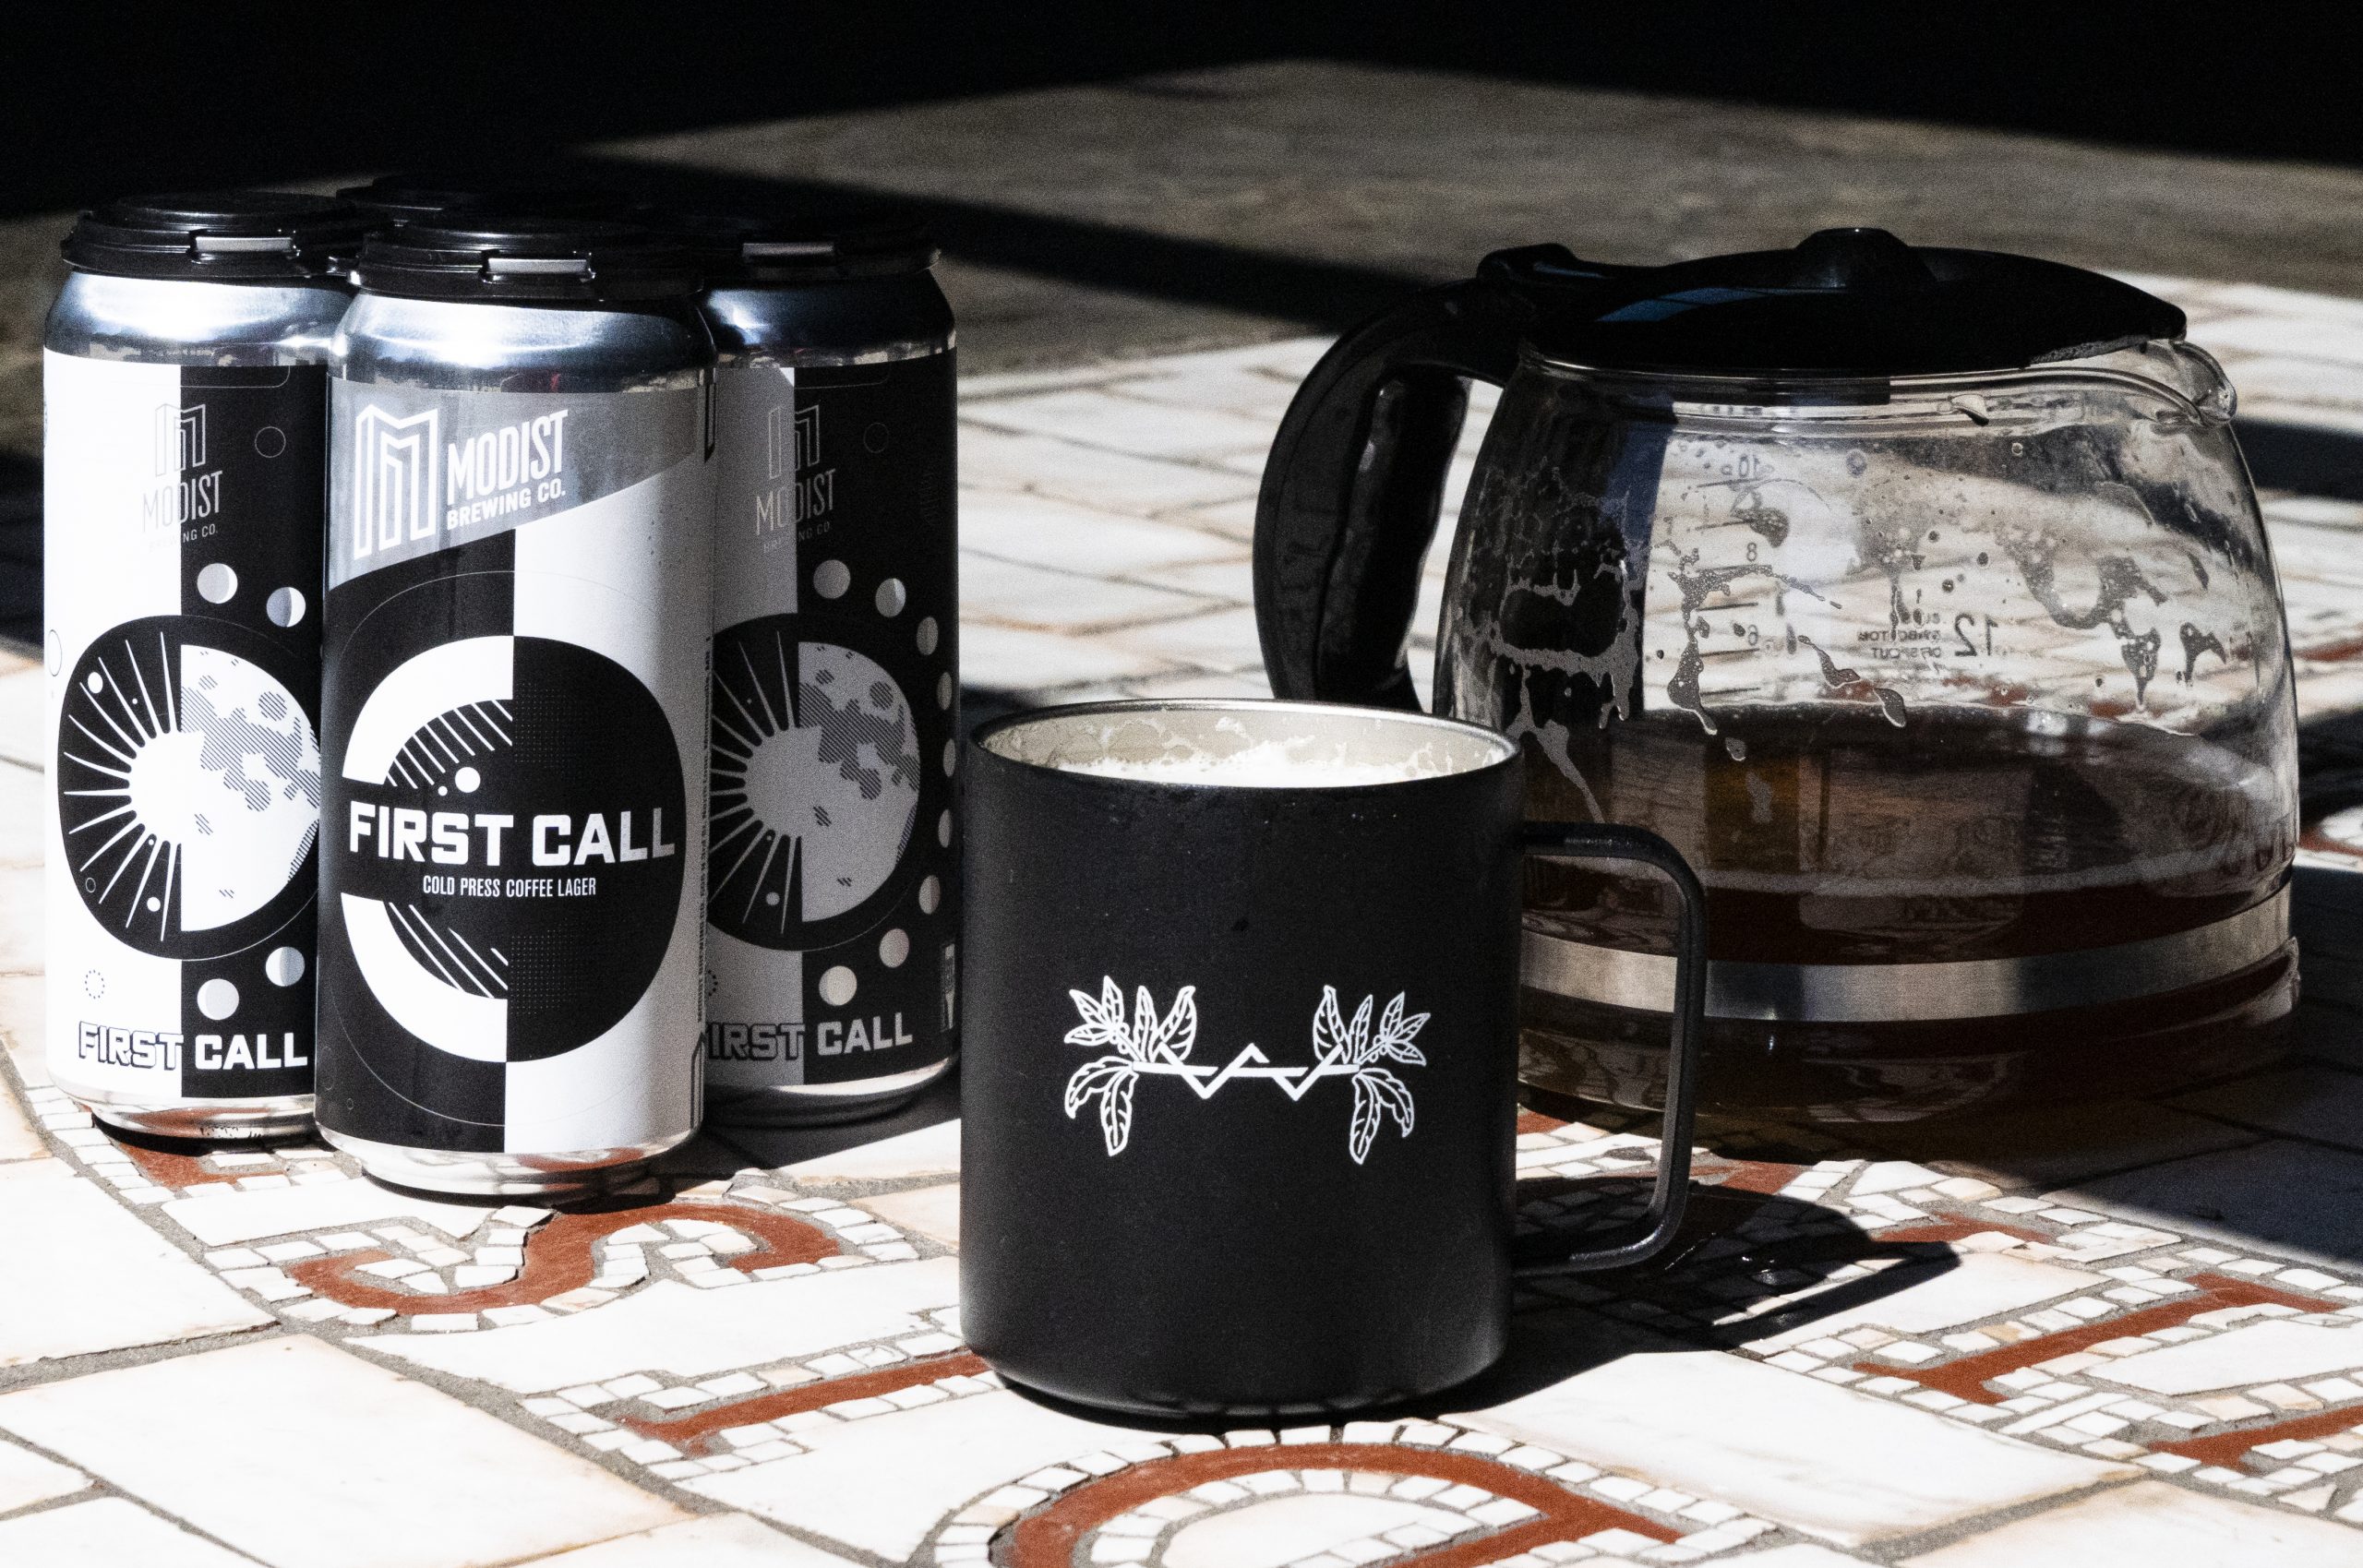 First Call is Back in Cans! - Modist Brewing